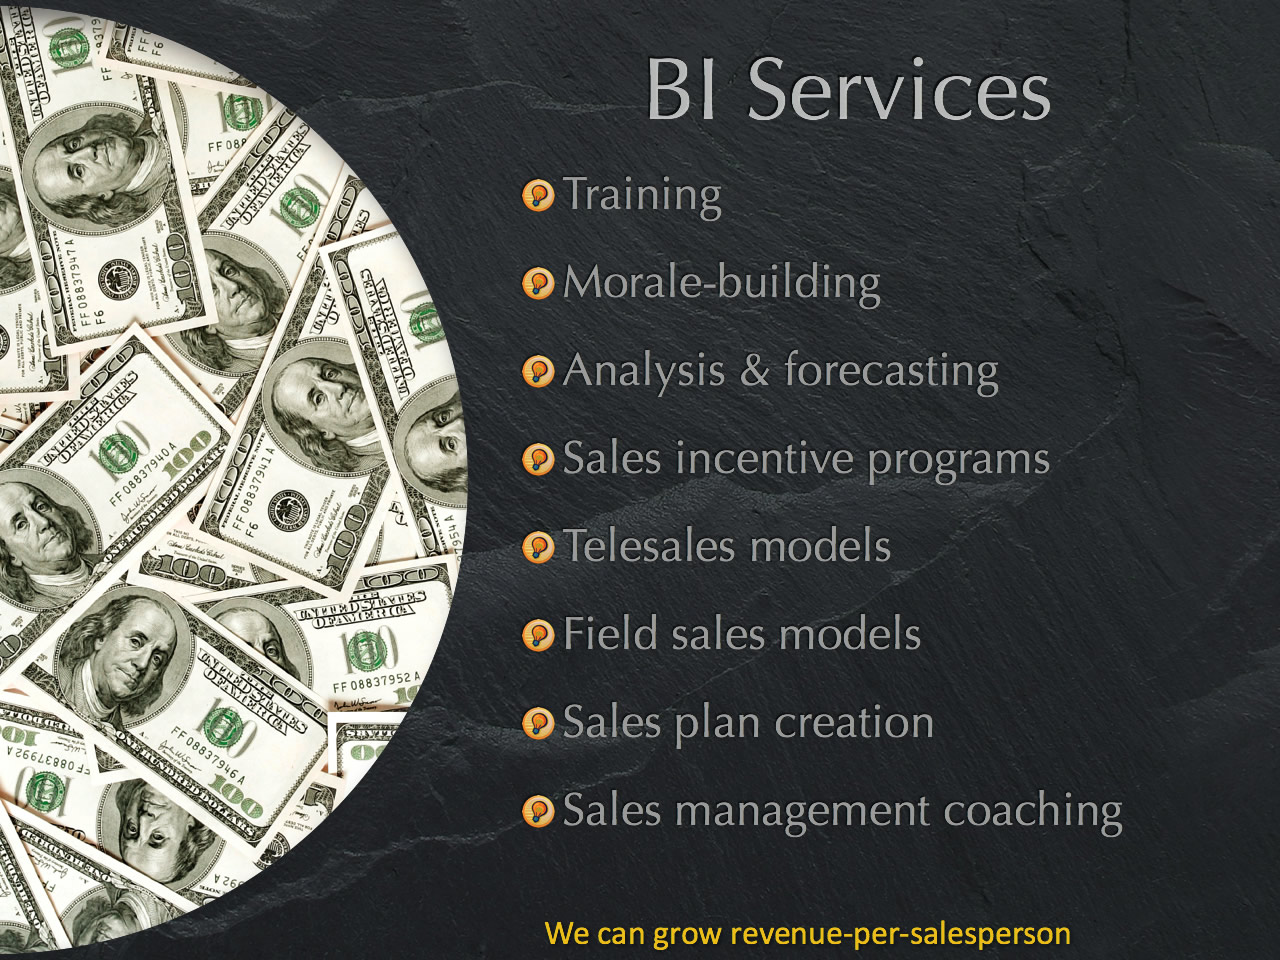 Big Innovations offers many services to help strengthen sales team performance